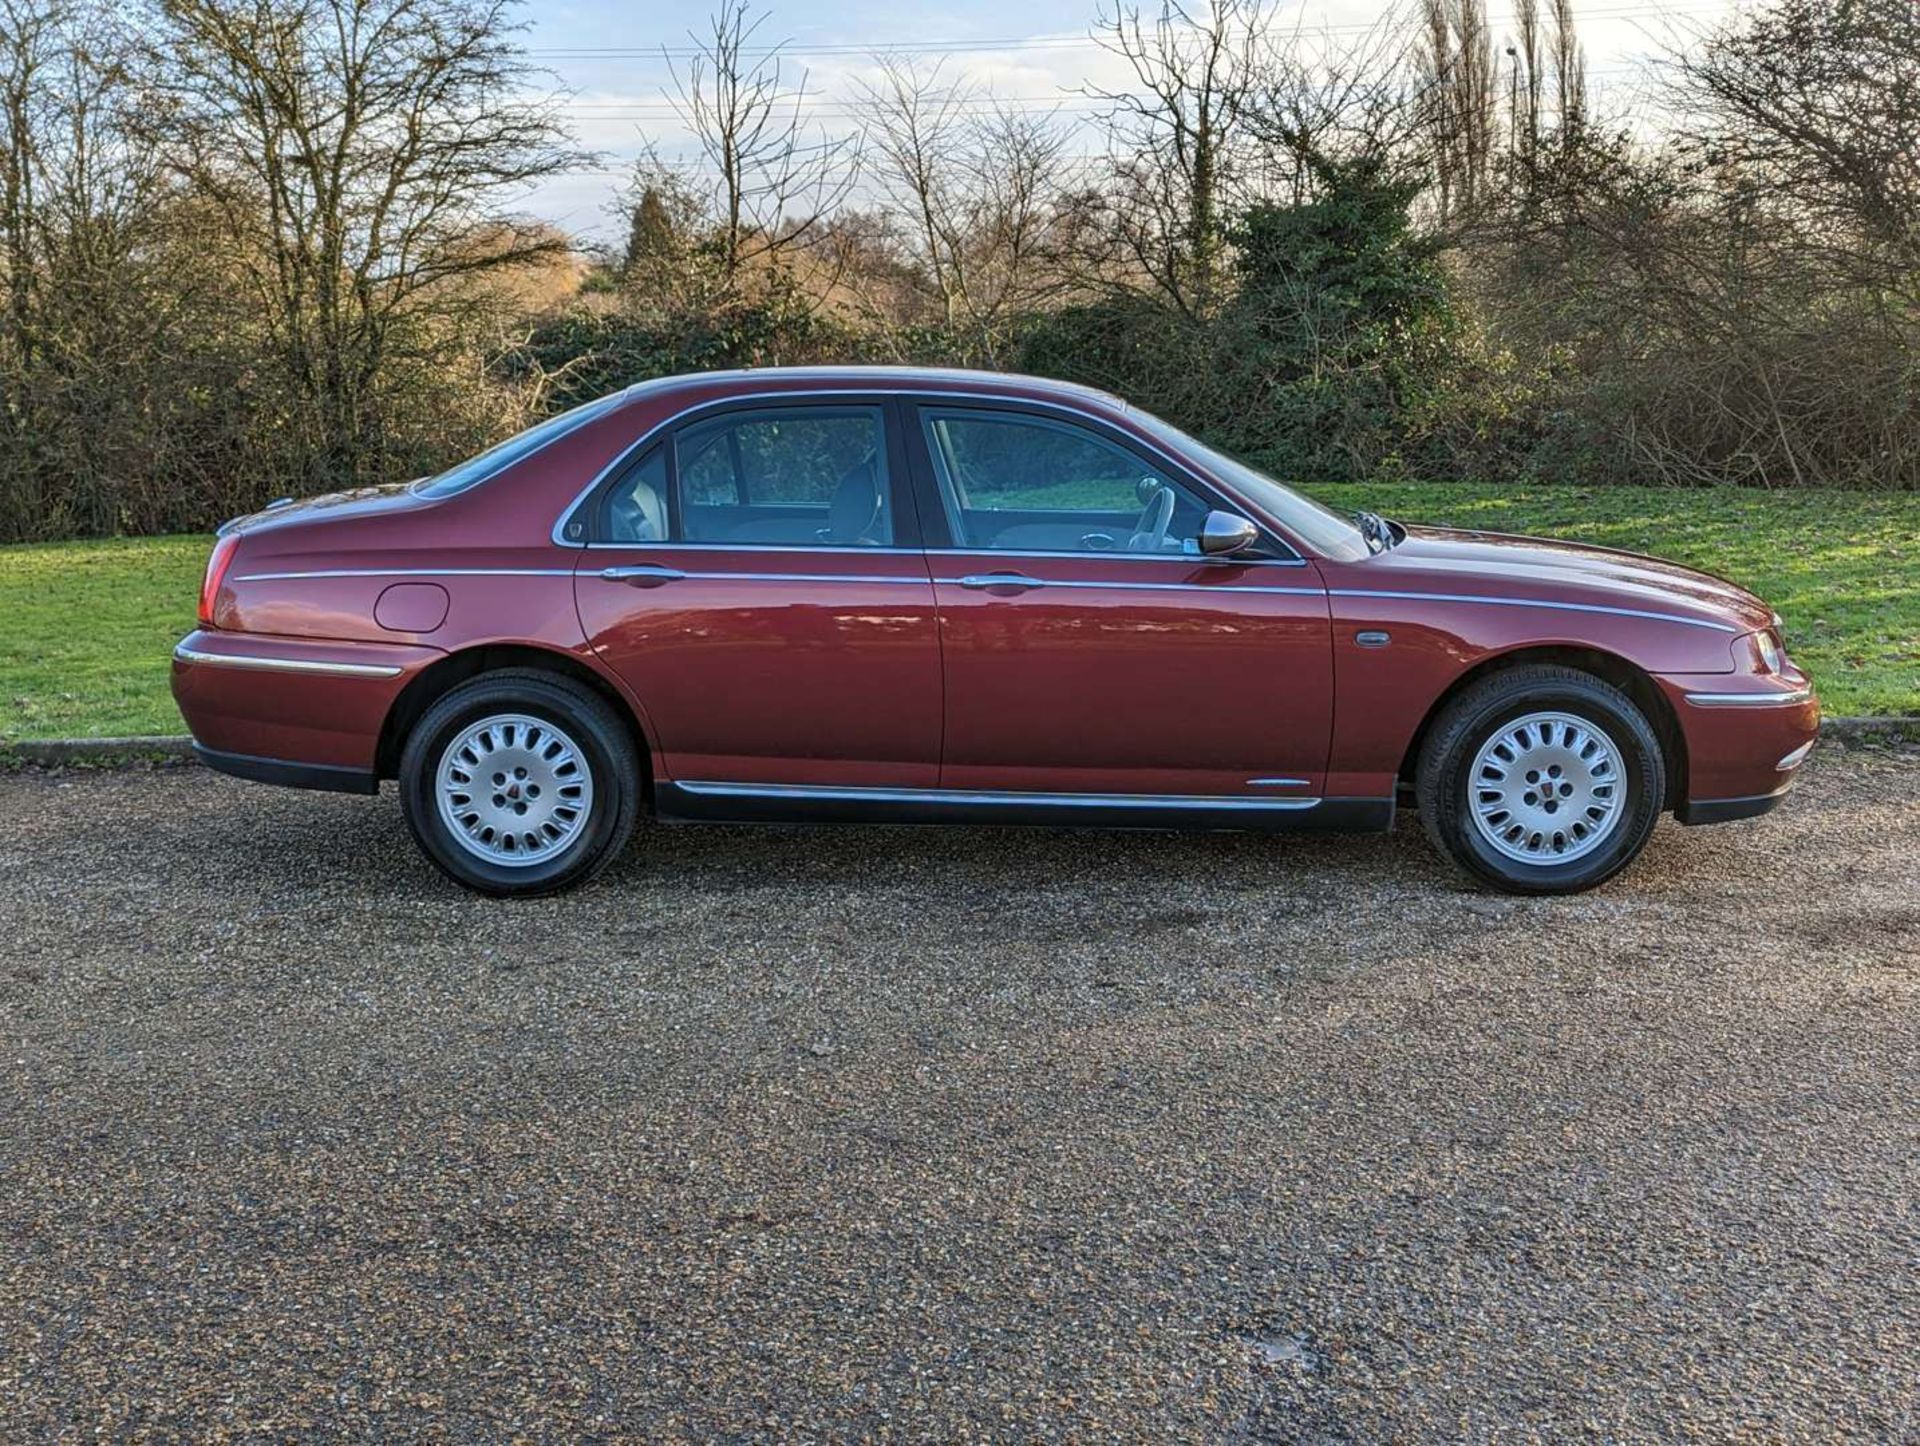 2001 ROVER 75 CLUB 2.5 V6 AUTOMATIC 14,641 MILES - Image 8 of 26